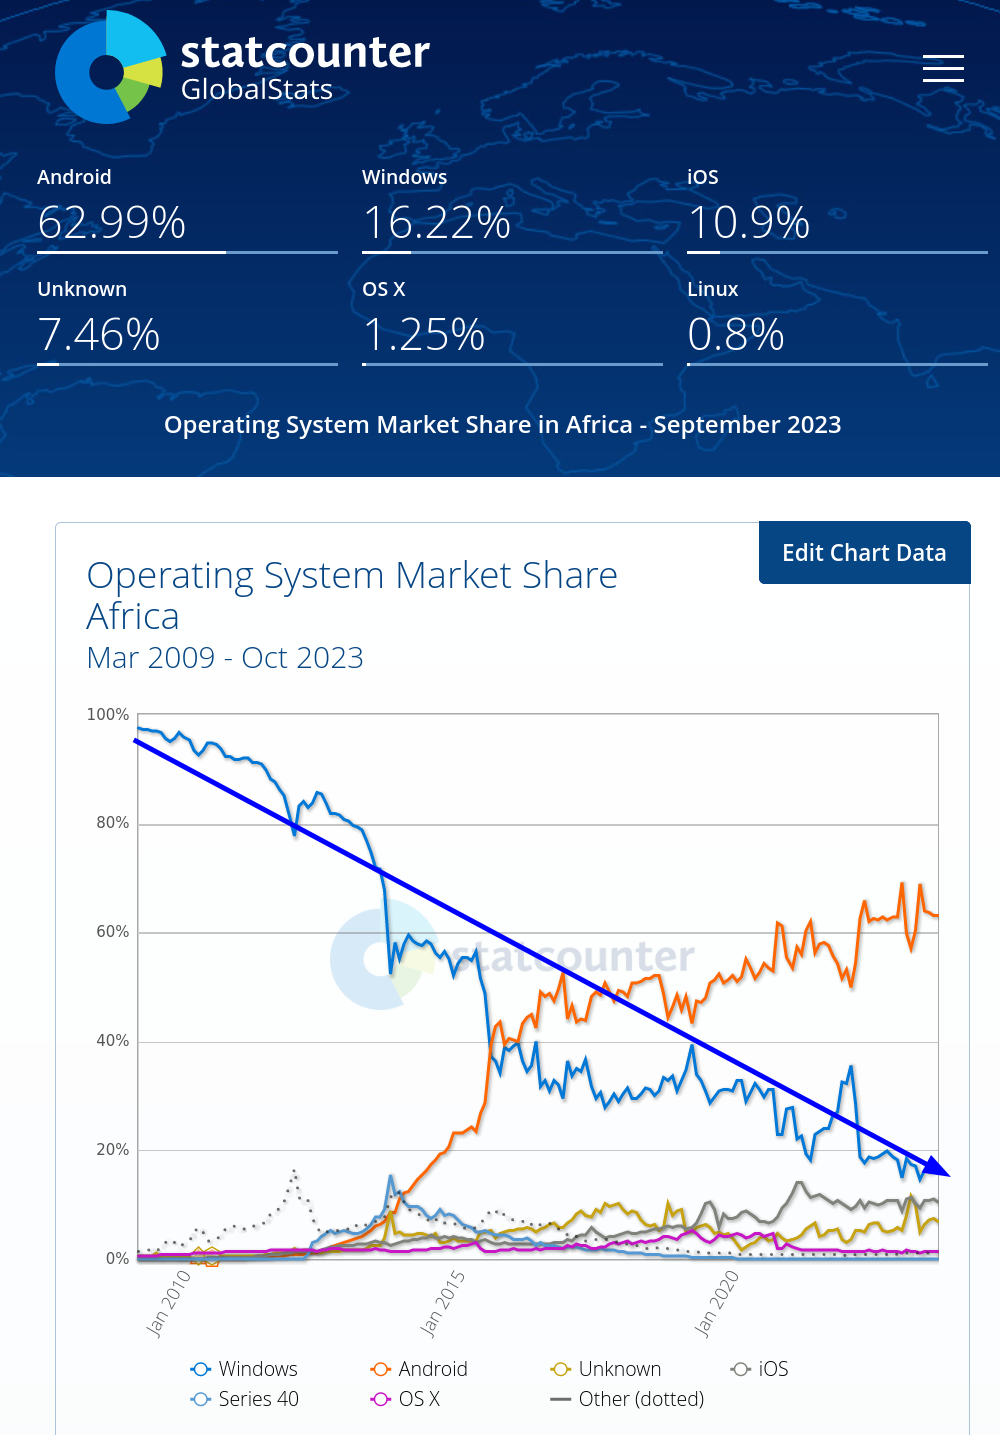 Operating System Market Share Africa